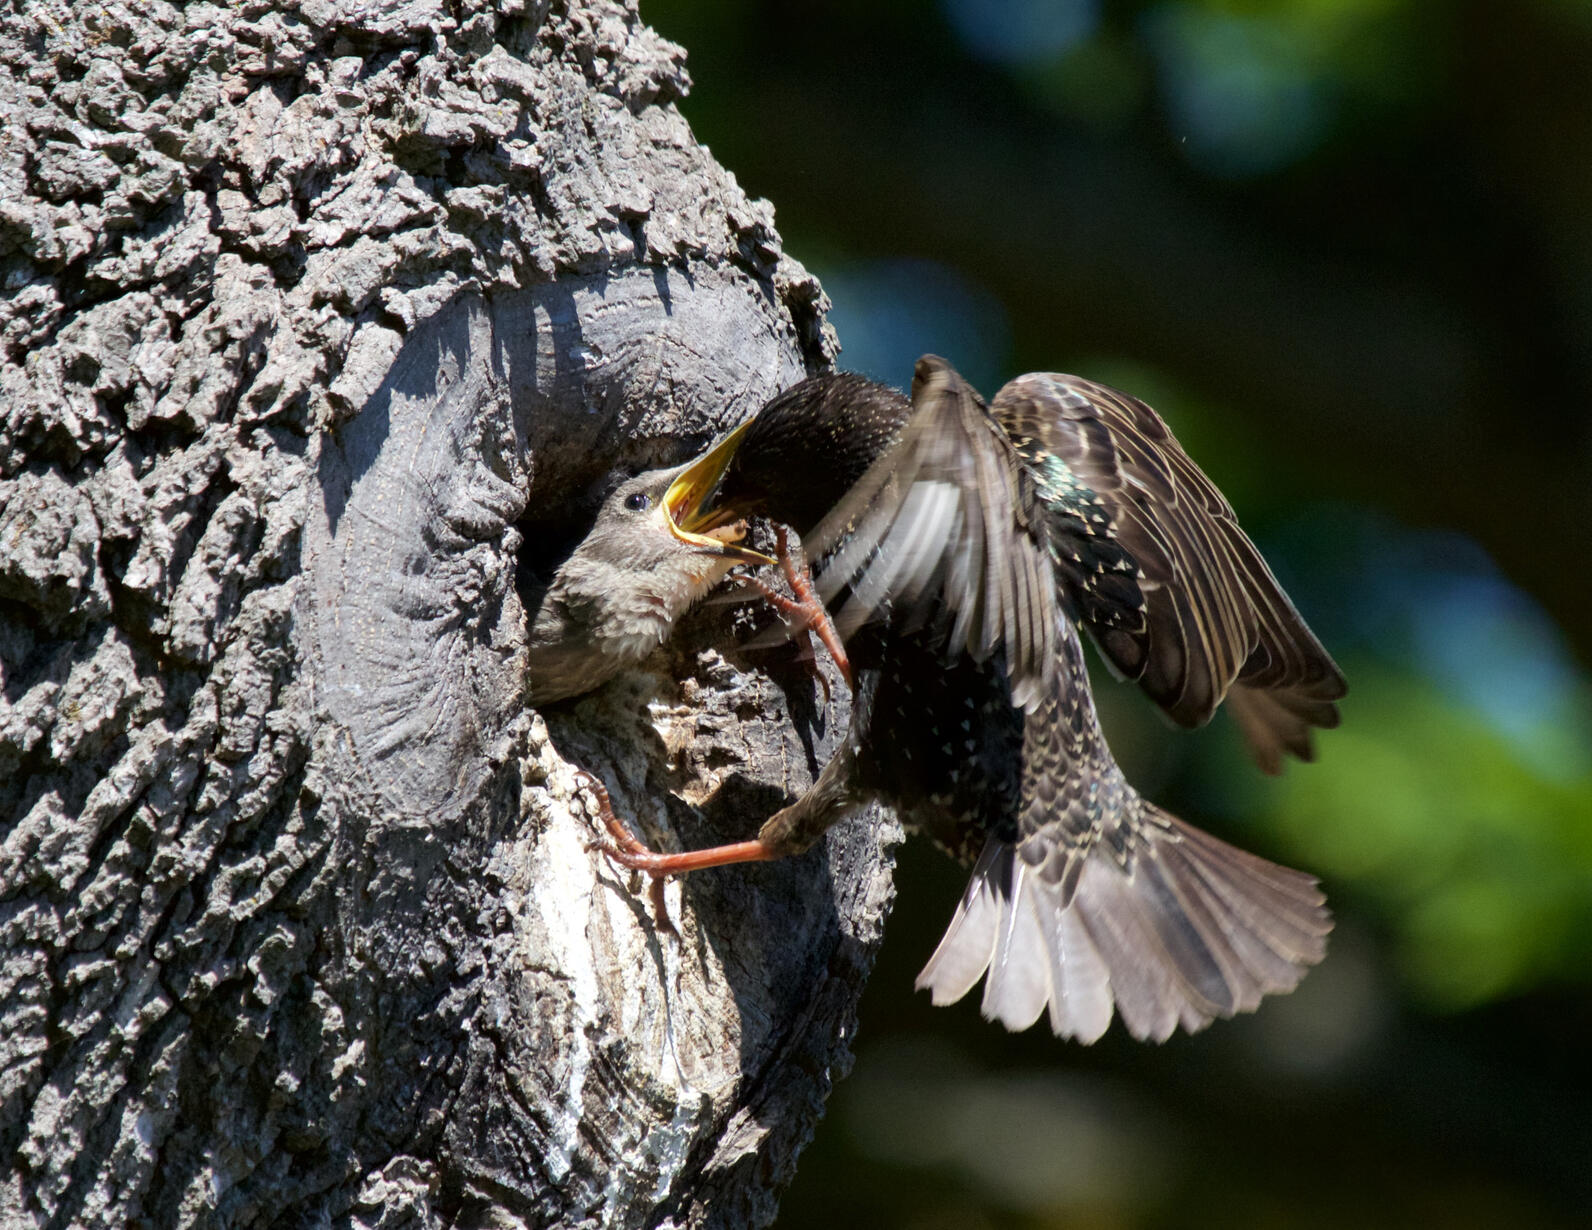 European Starling feeding young in cavity nest.